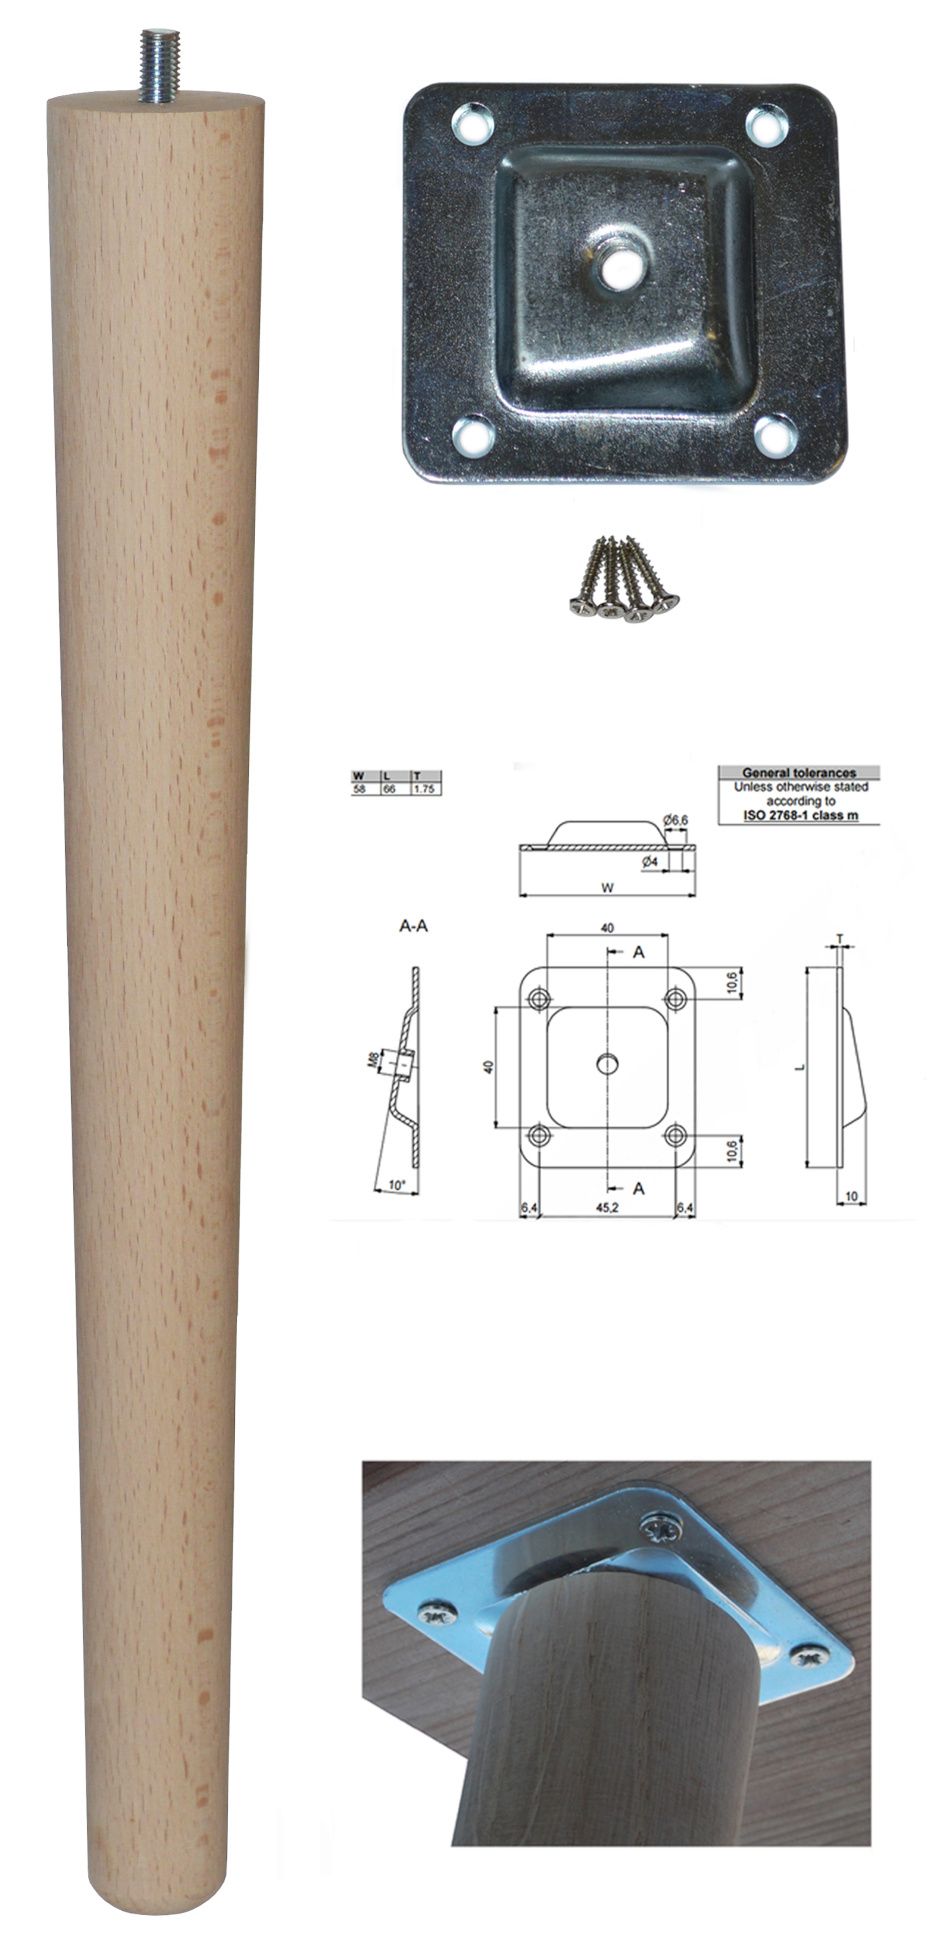 TLB-390+A   390mm Beech Tapered Leg w/ Angled Fixing Plate